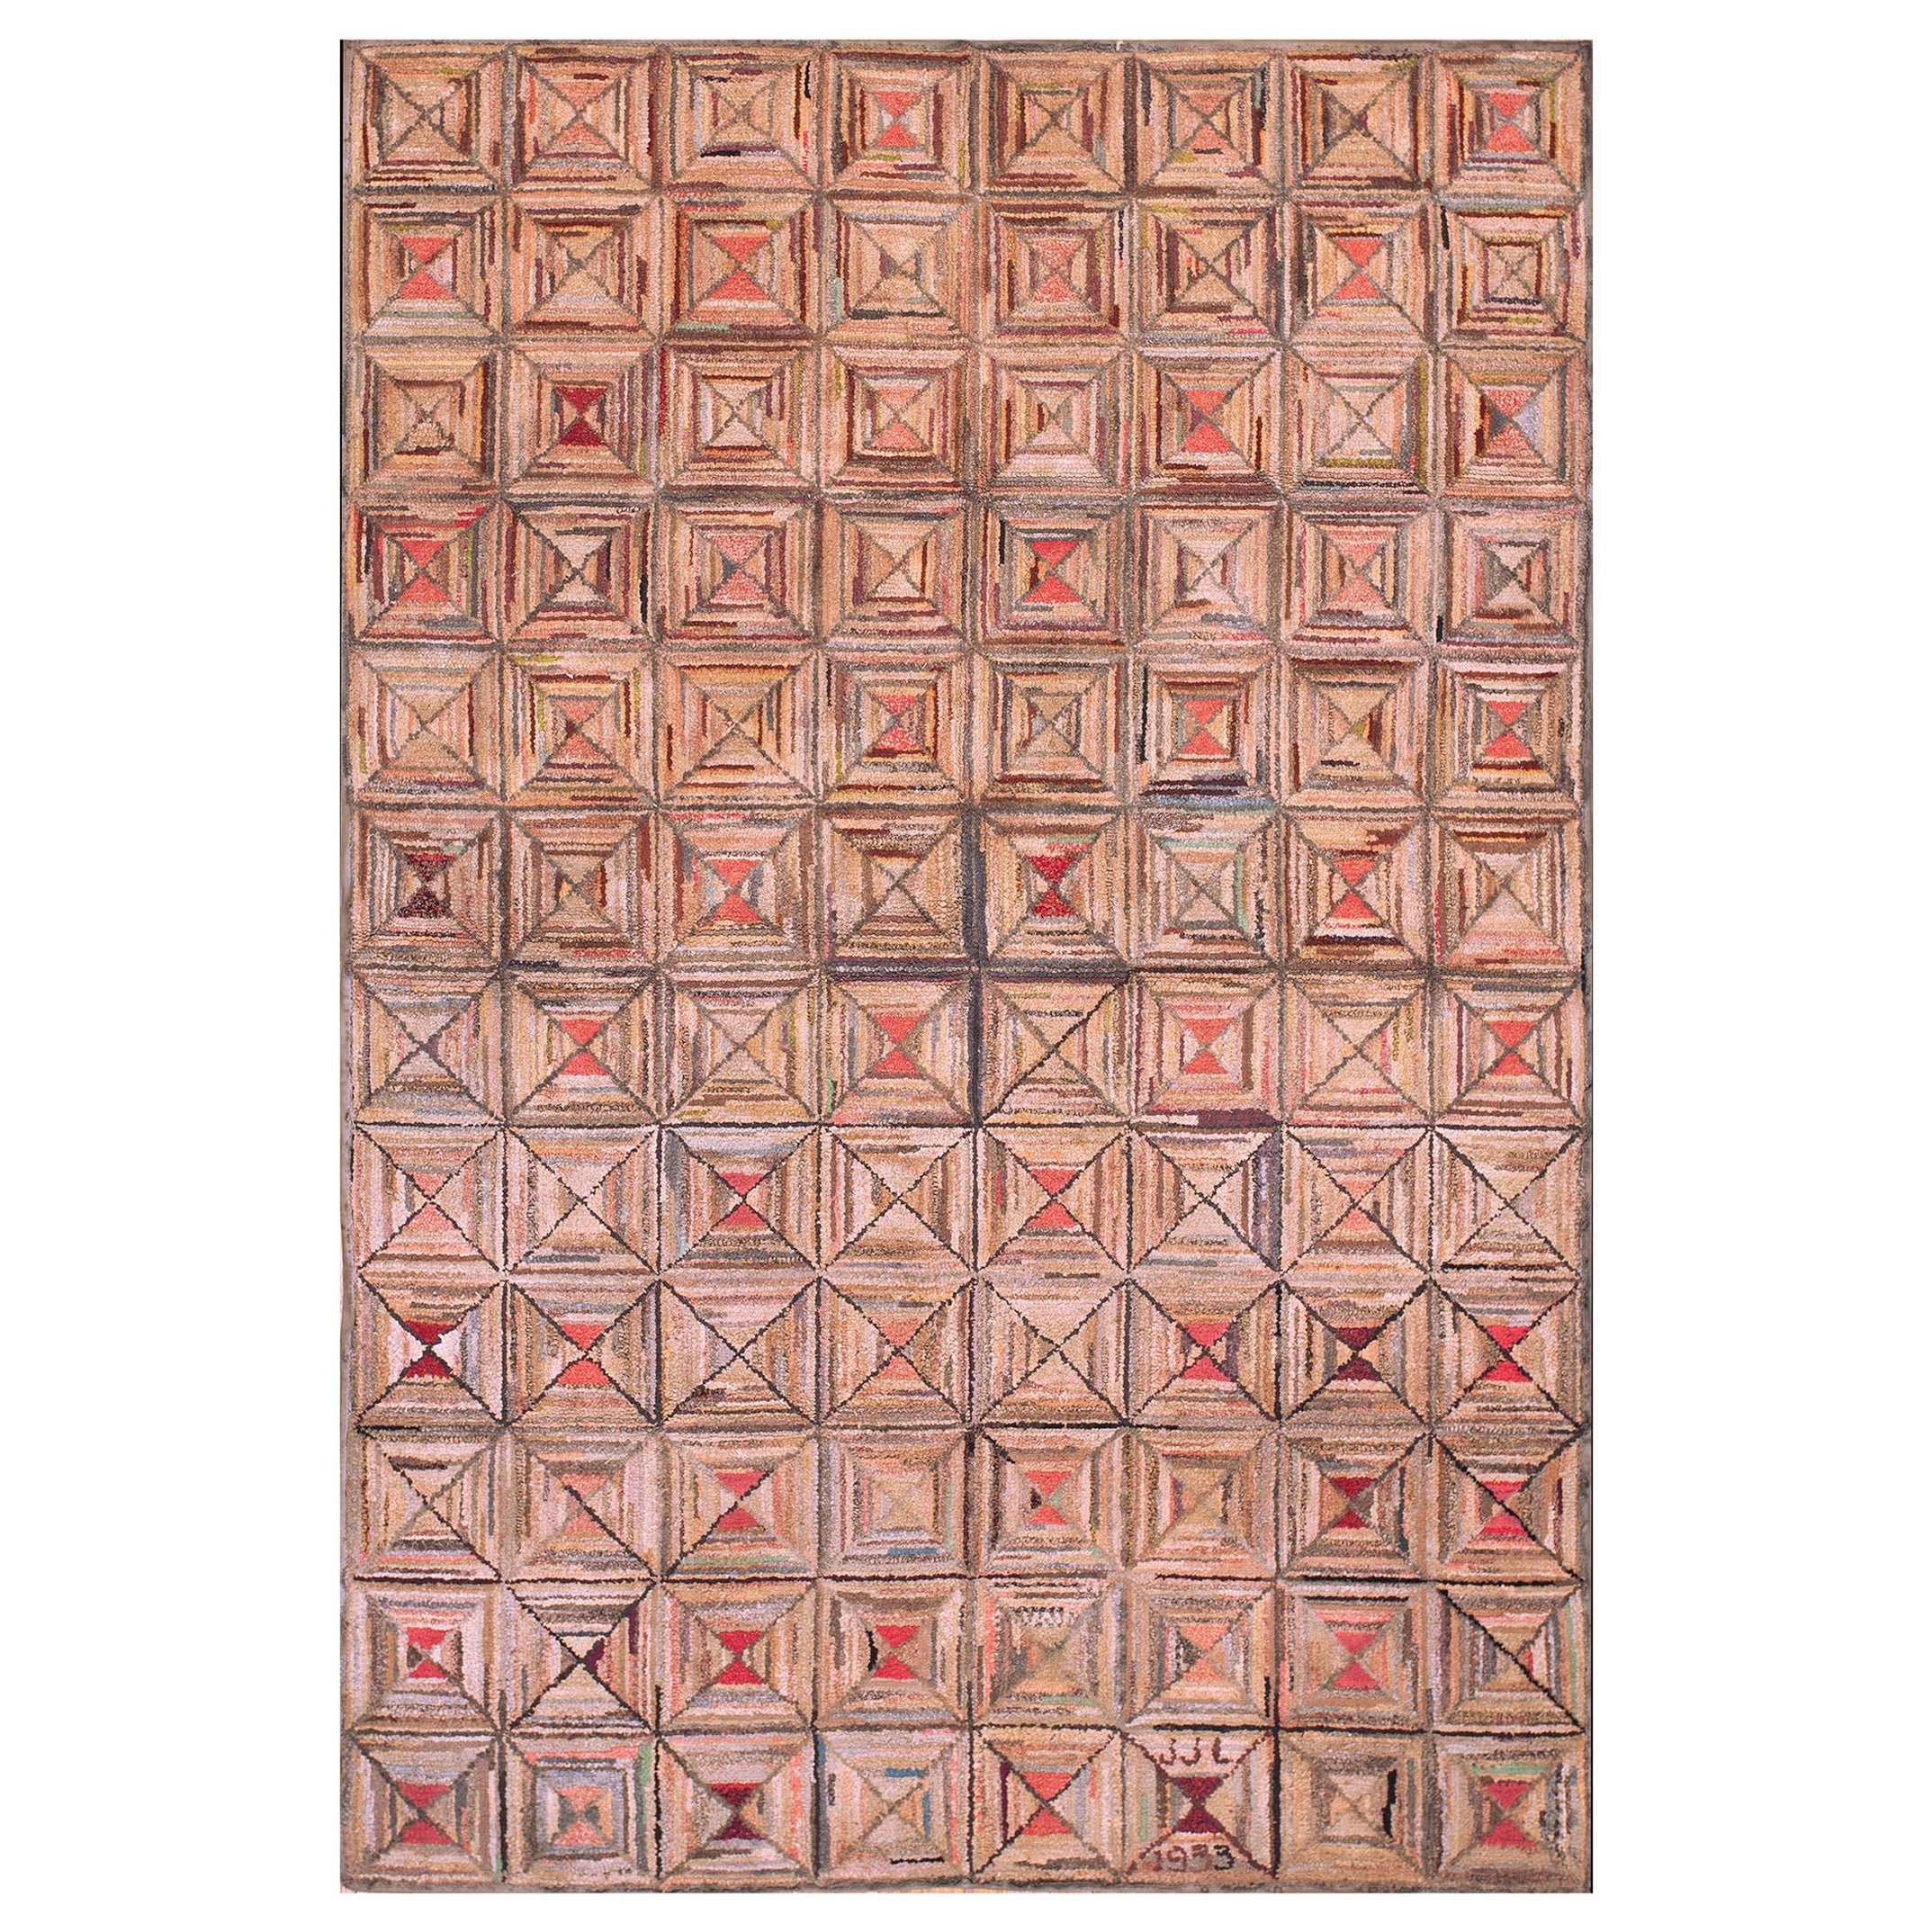 Early 20th Century American Hooked Rug ( 5'6" x 8' - 167 x 244 )